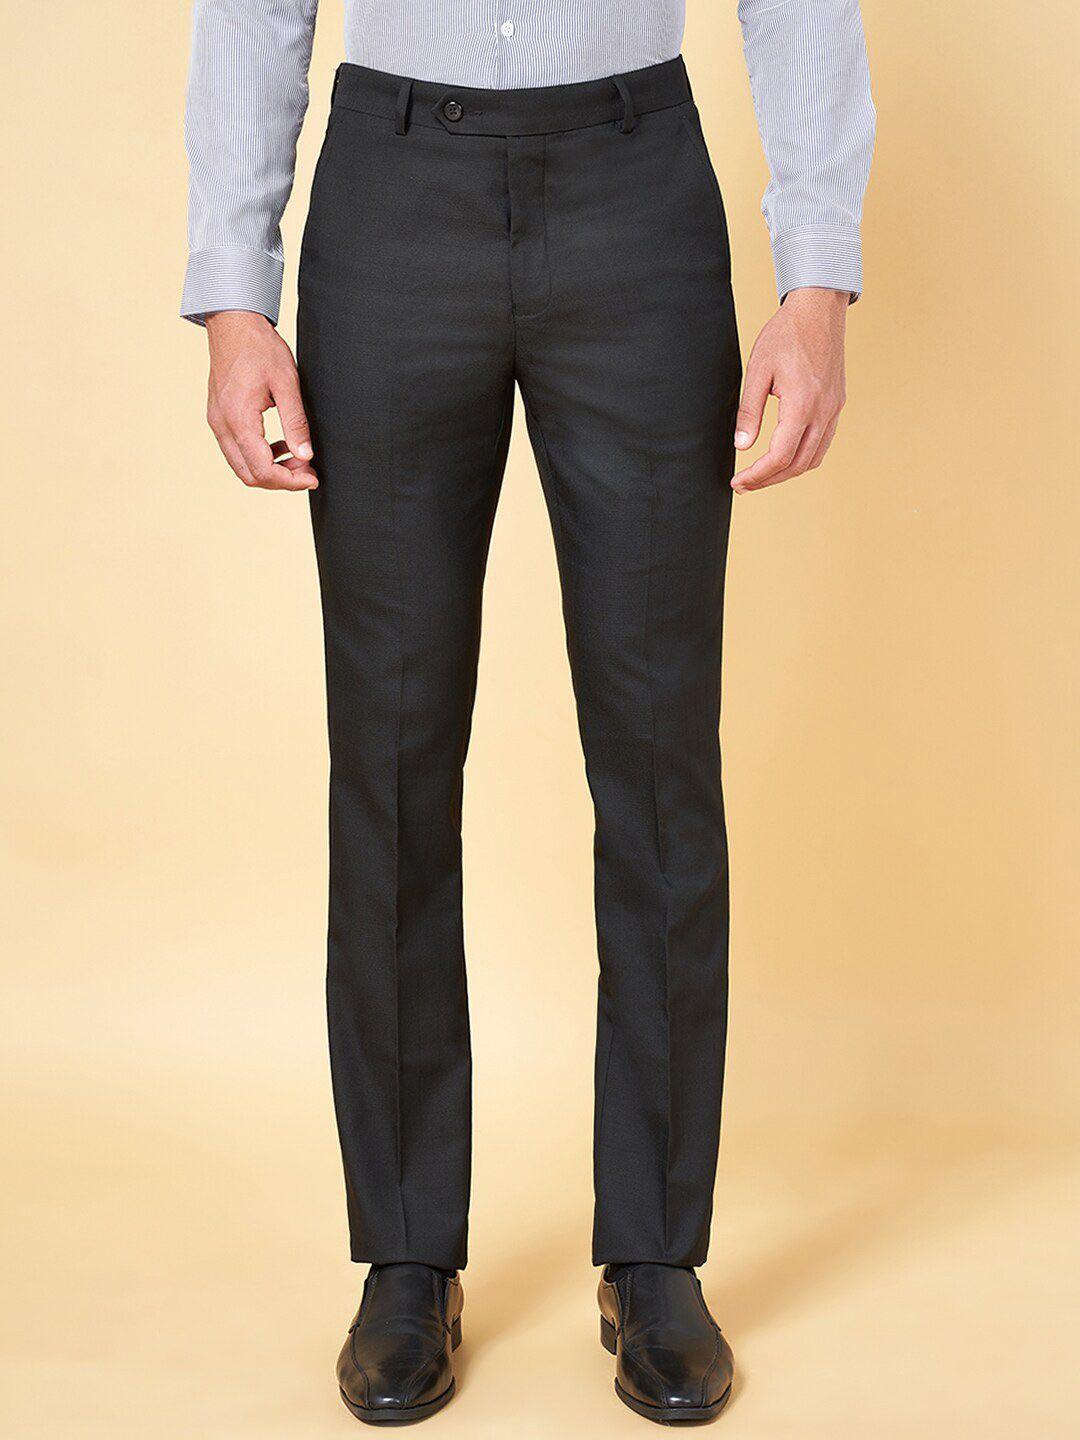 byford-by-pantaloons-men-slim-fit-low-rise-formal-trousers